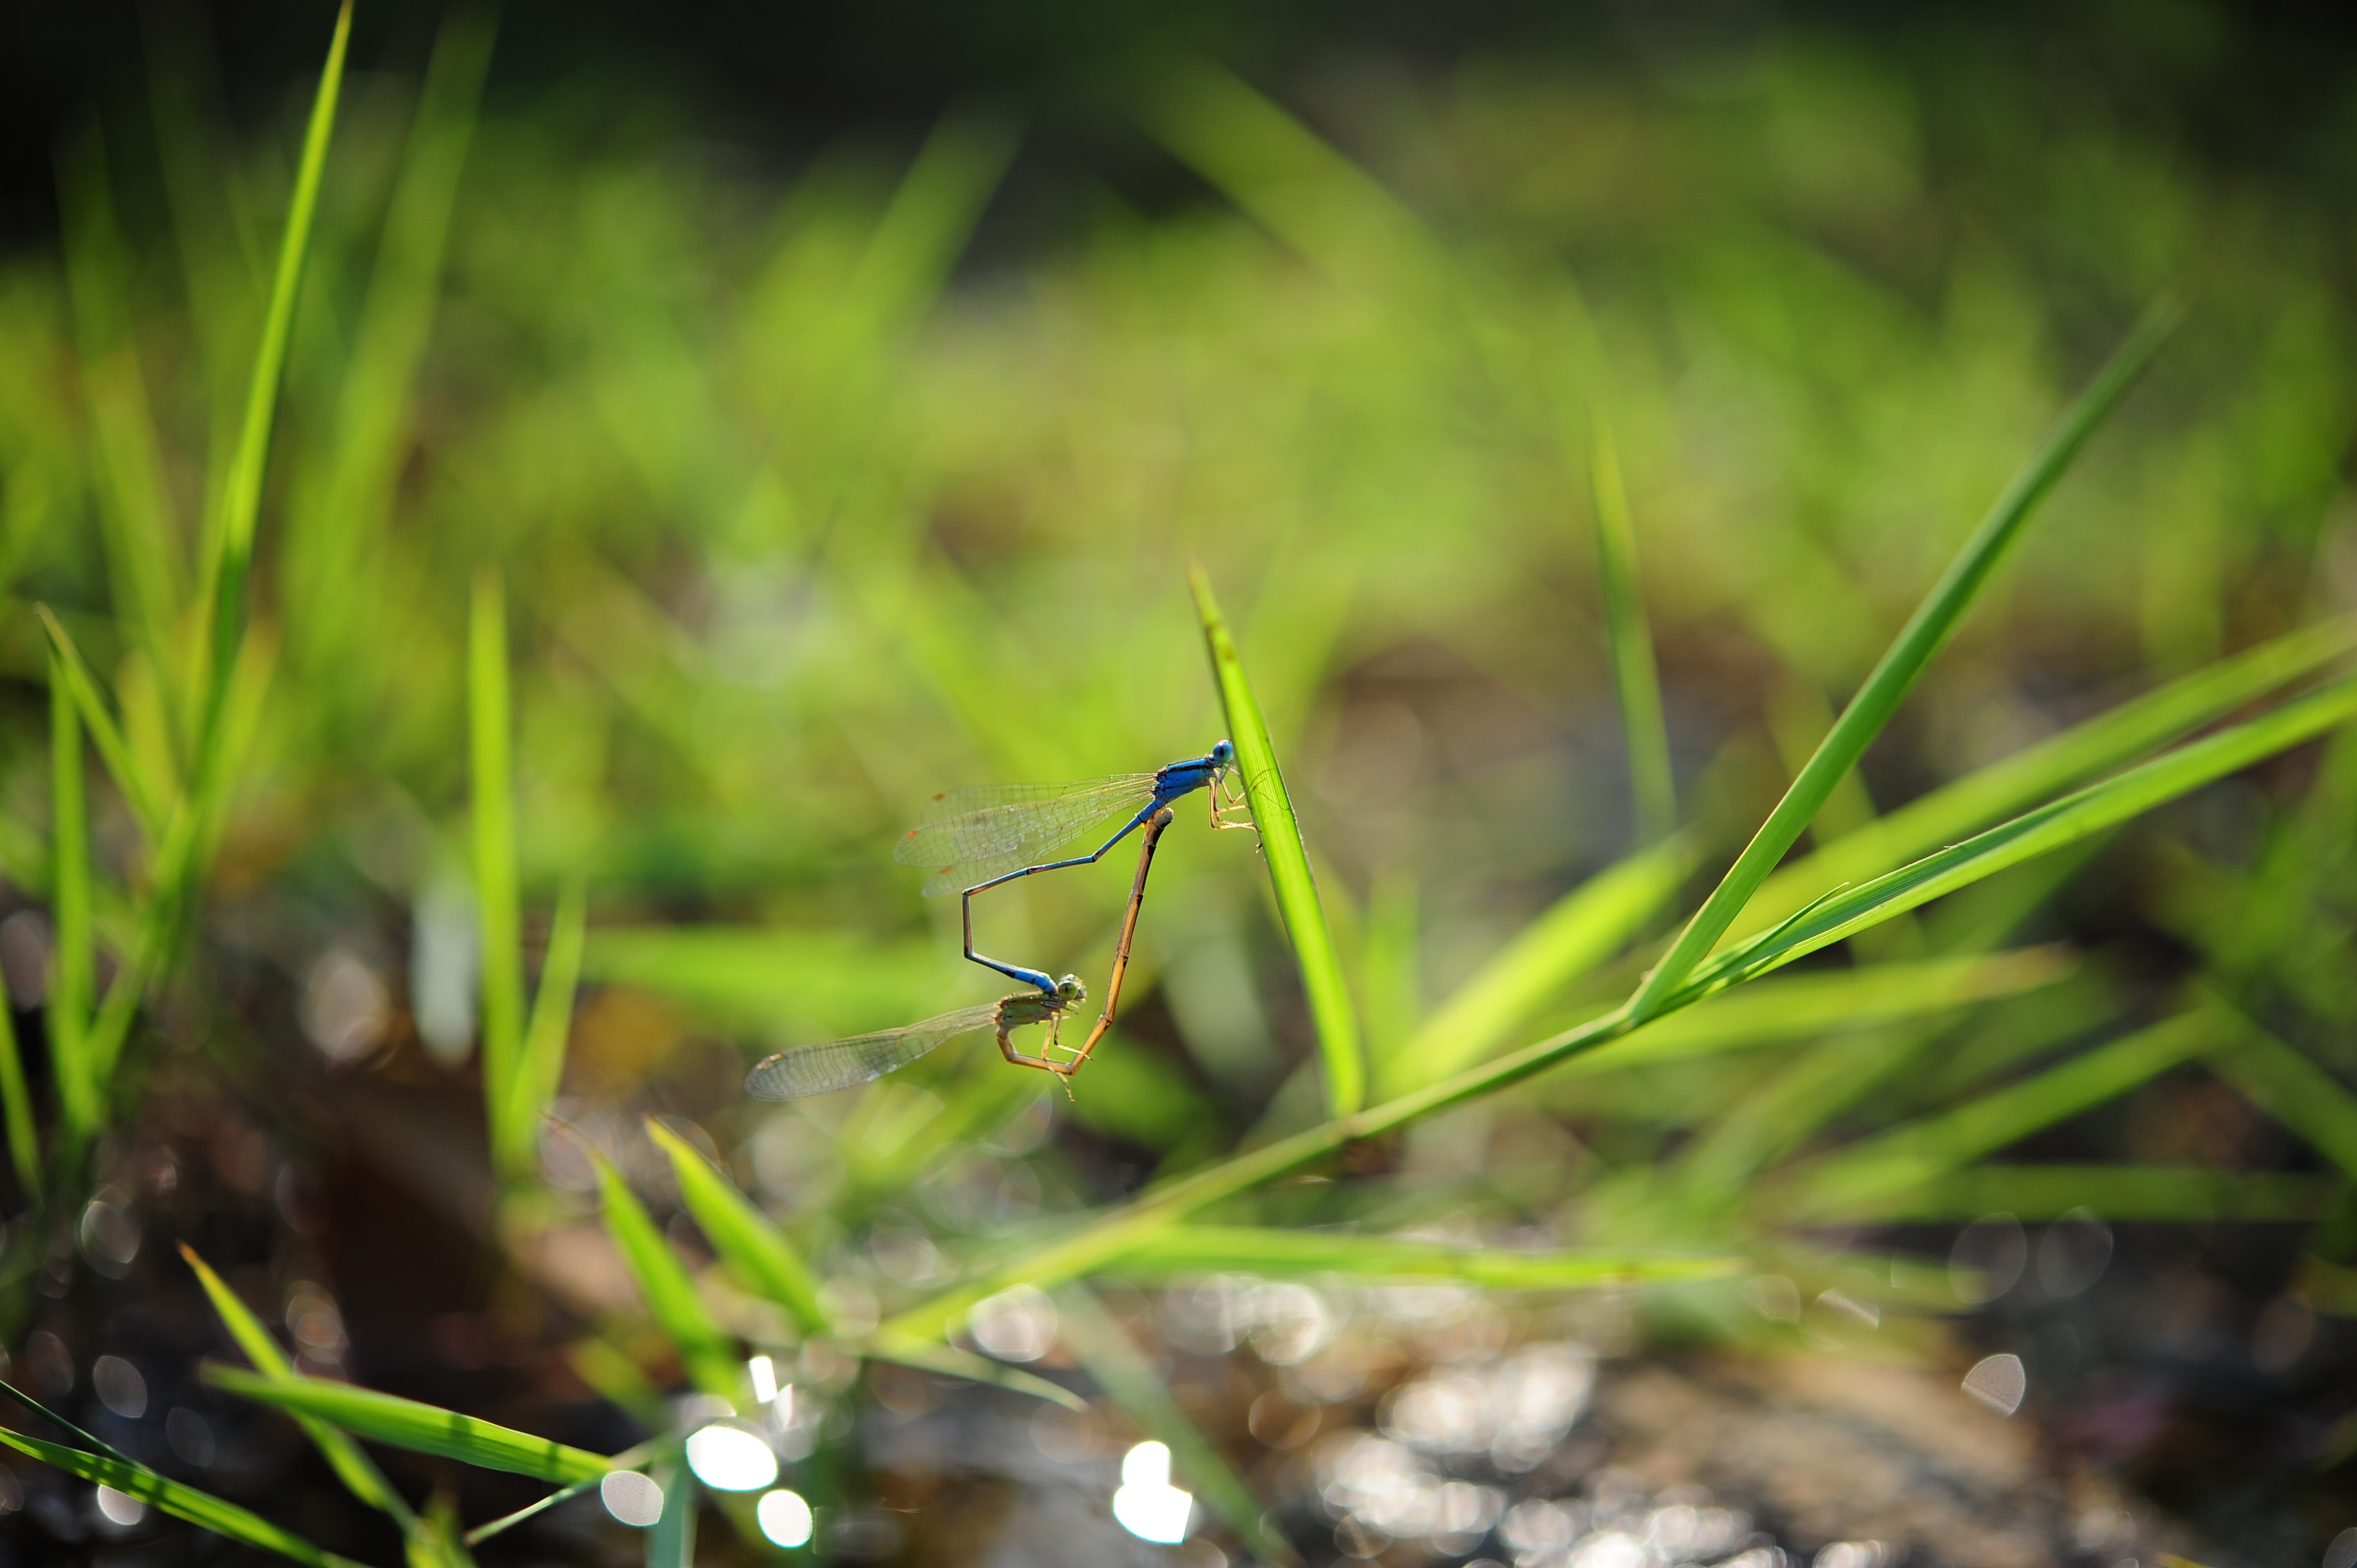 2 blue, and yellow, damselflies mating perched on green grass in shallow focus lens